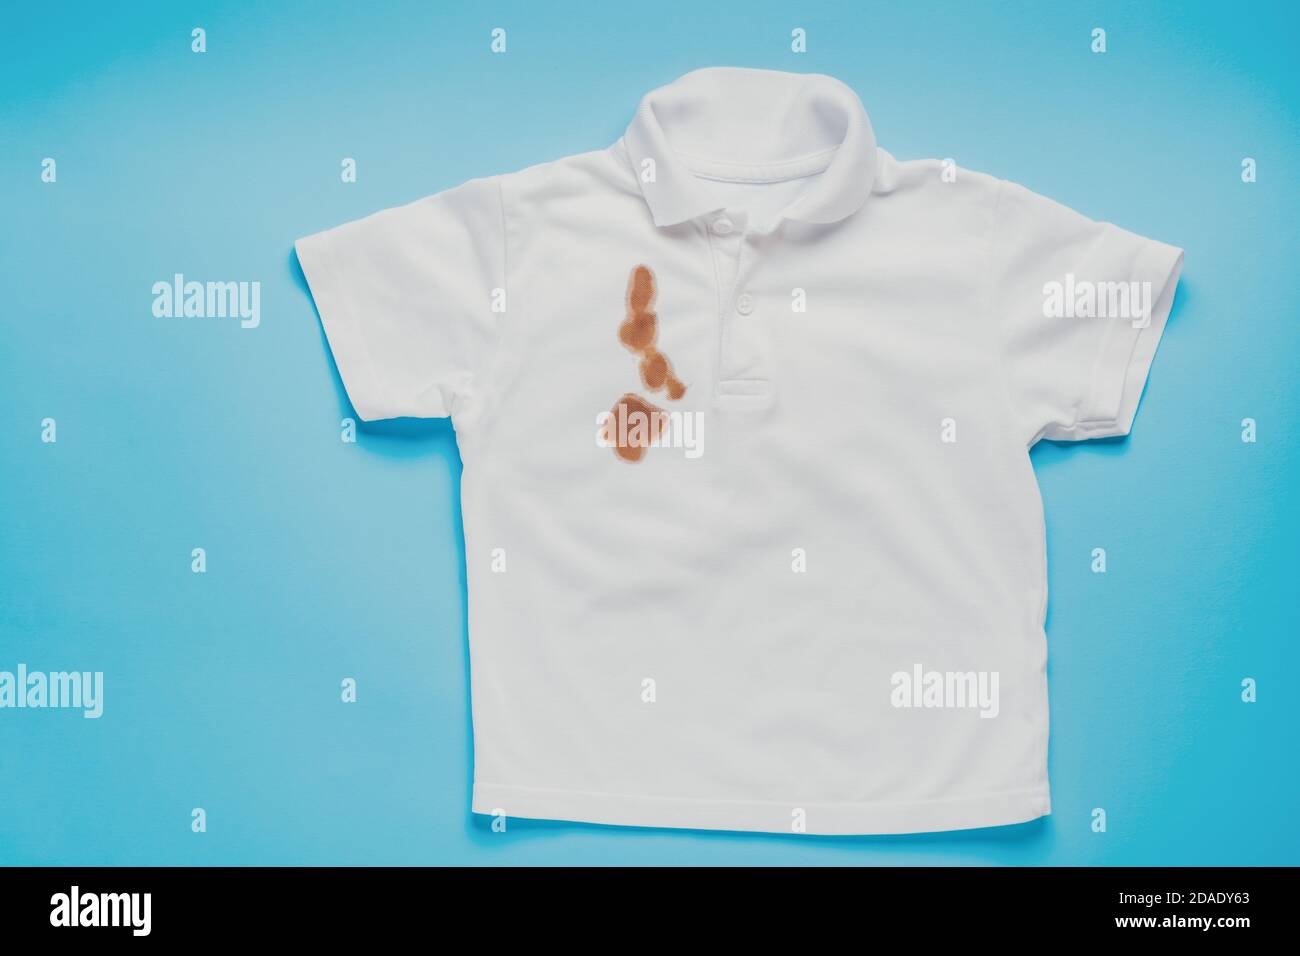 stains from soy sauce on white clothes on a blue background 2DADY63